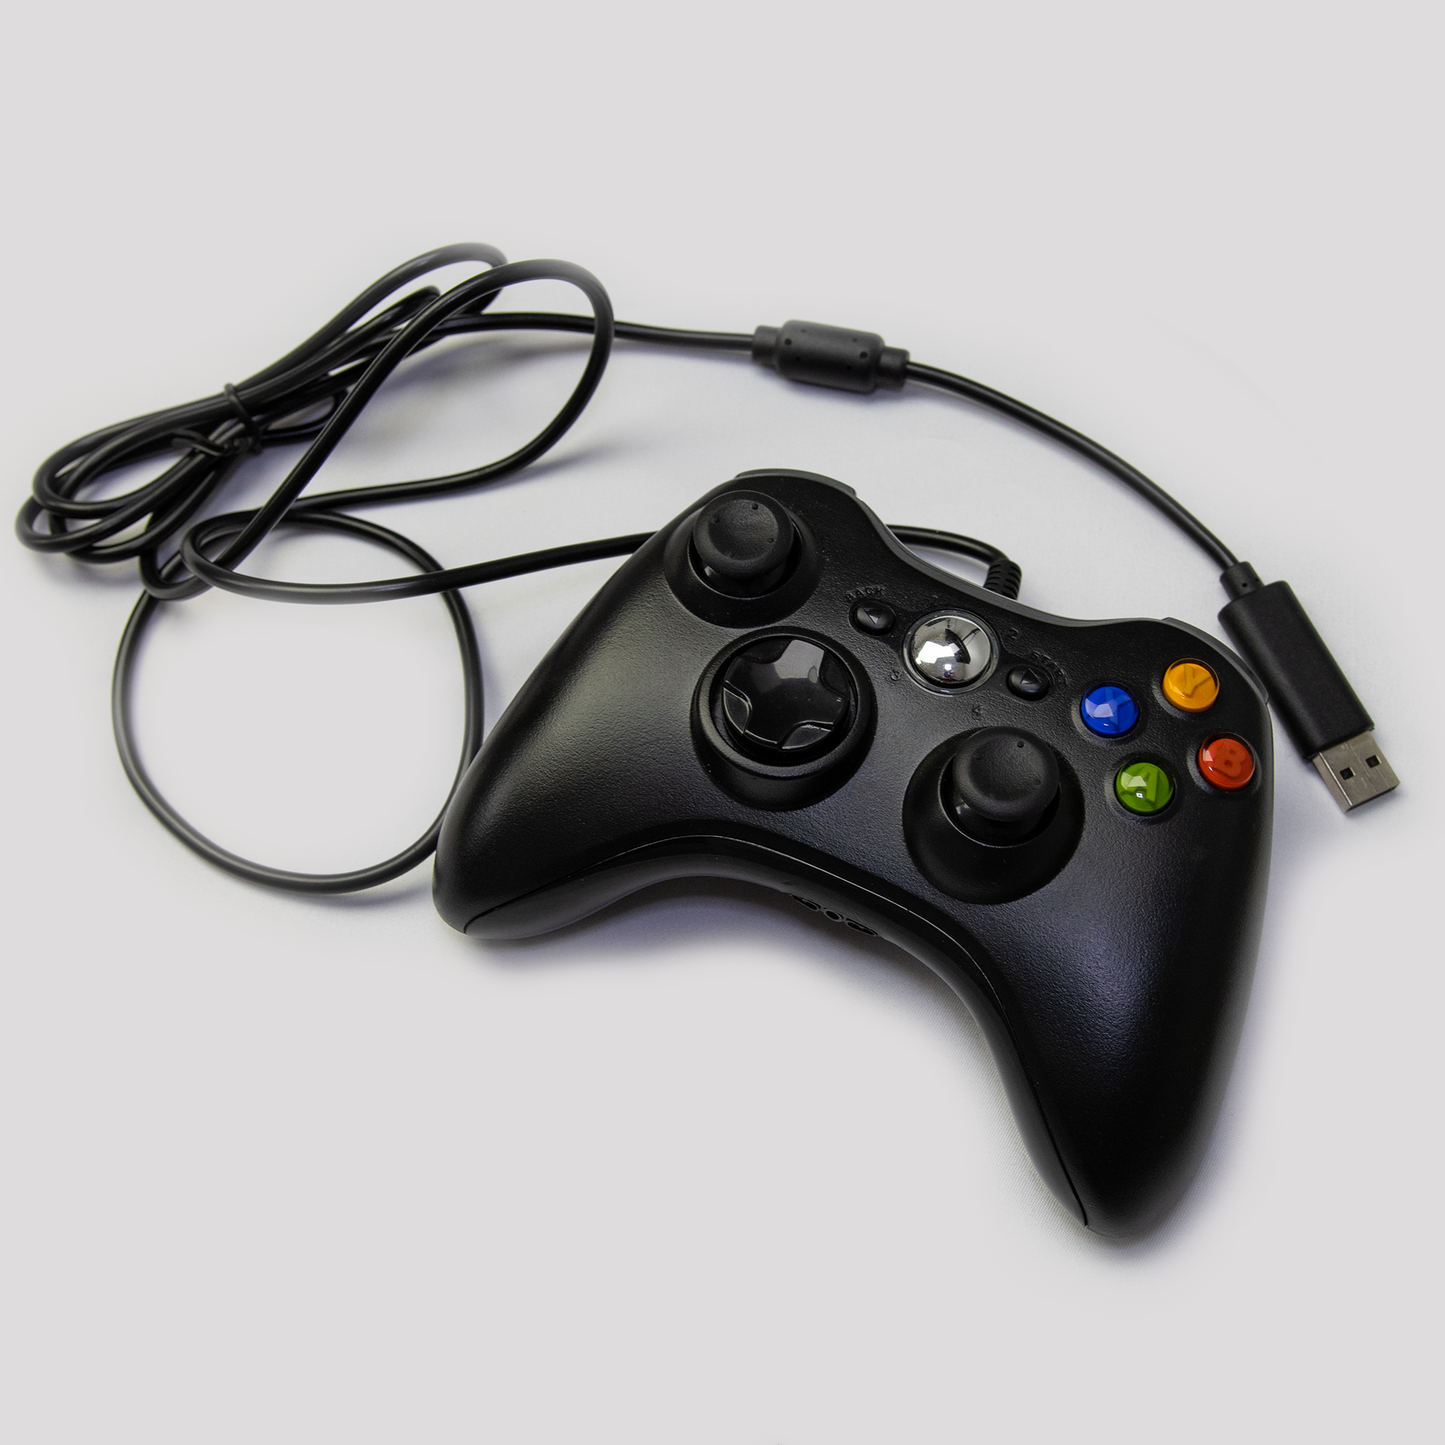 Xbox controller for Livesky system (Sentry, Defender, and Spectre)